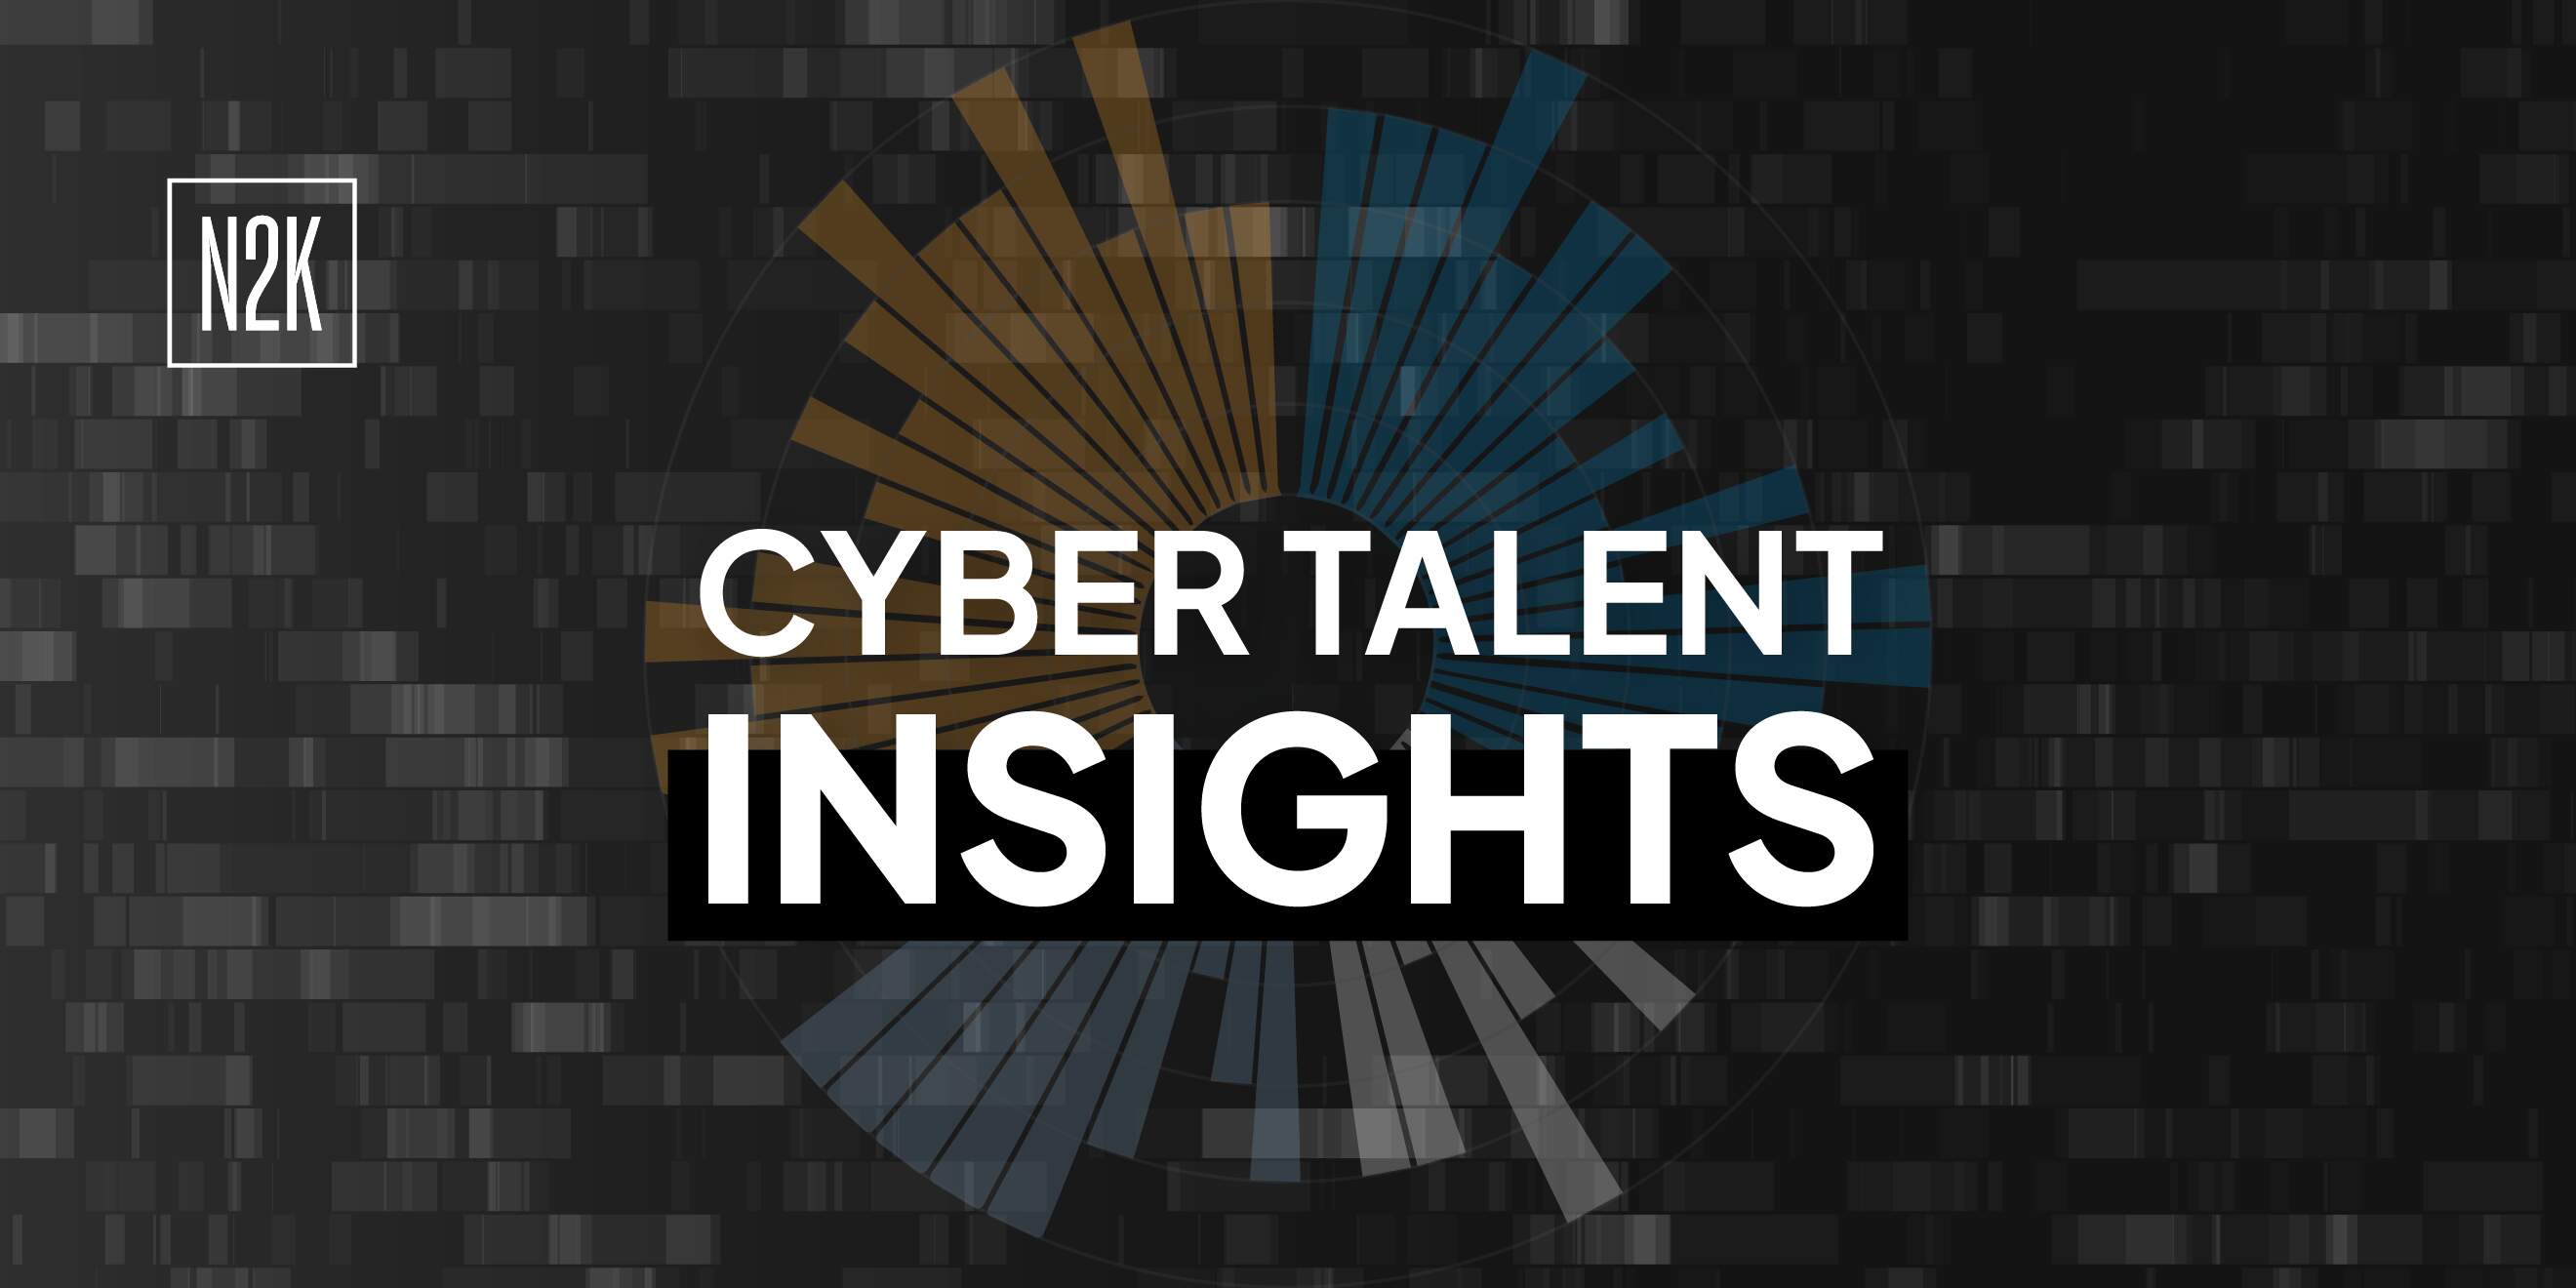 Cyber Talent Insights: Strengthening the cyber talent pipeline apparatus. (Part 3 of 3)